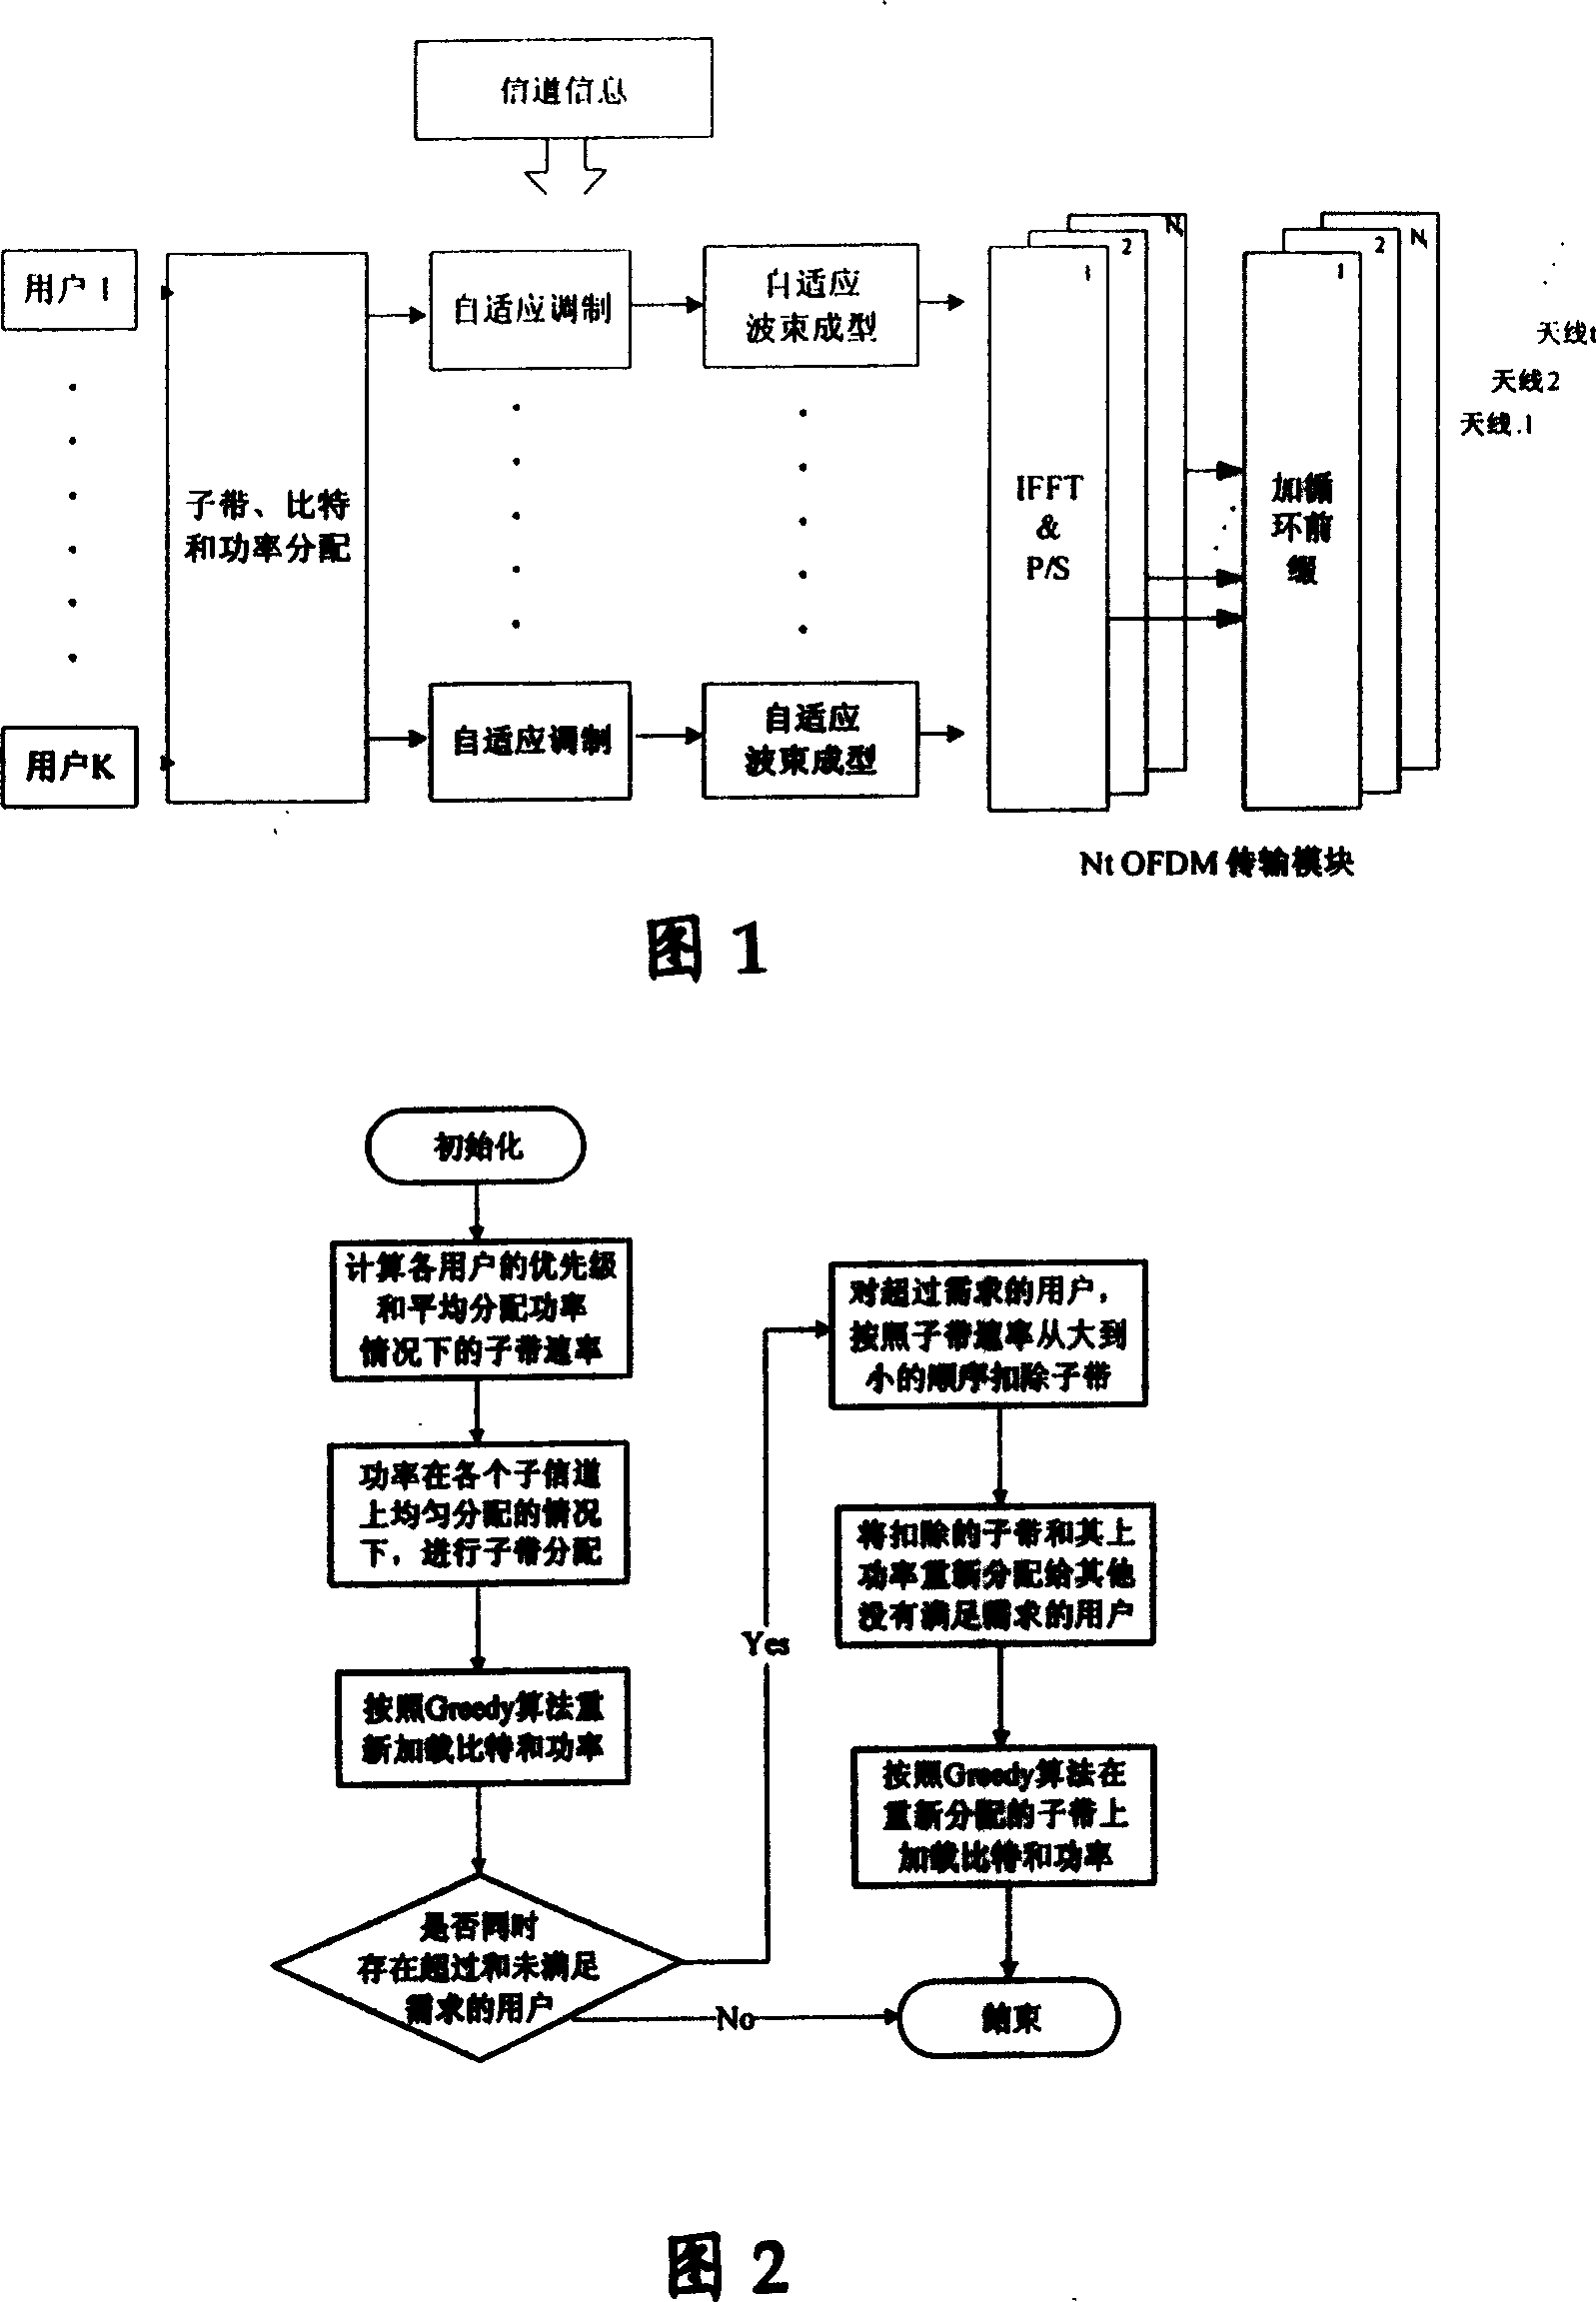 Resource allocation method of the multi-user MIMO-OFDM system of the QoS